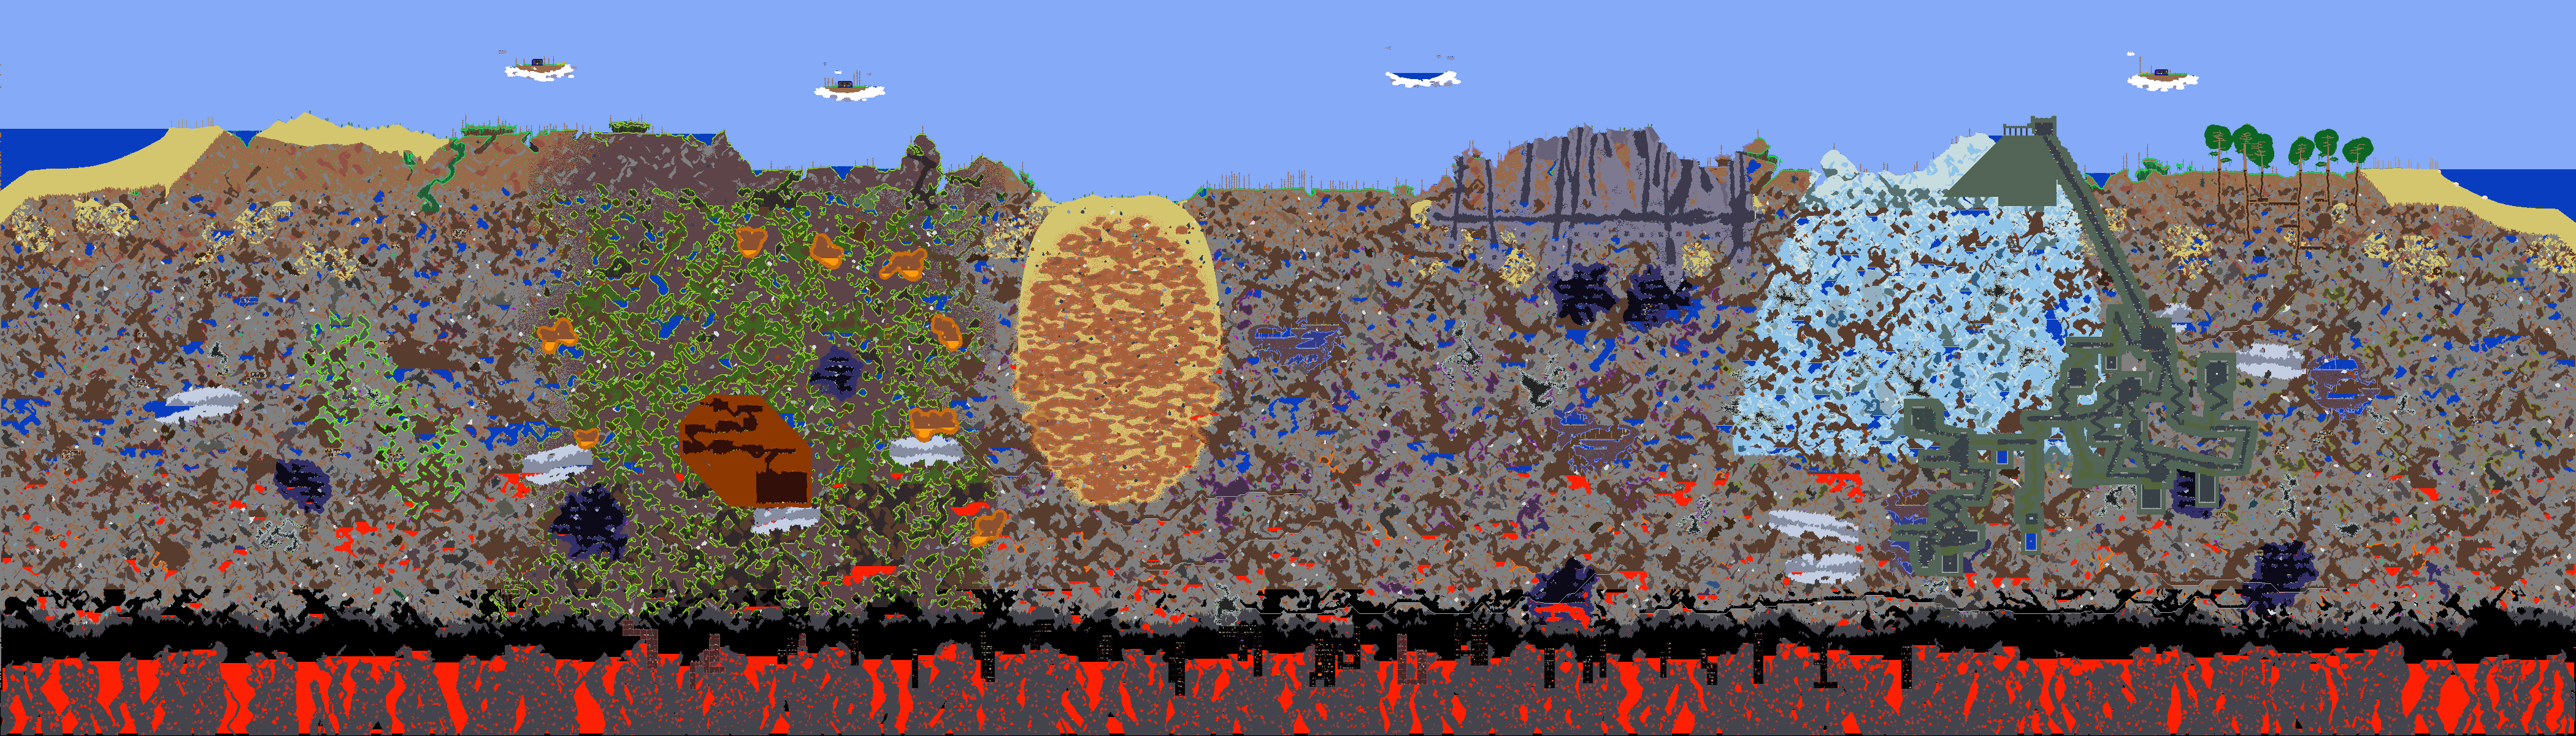 REPORTED** - Server and Game Different Worldgen With Same Seed